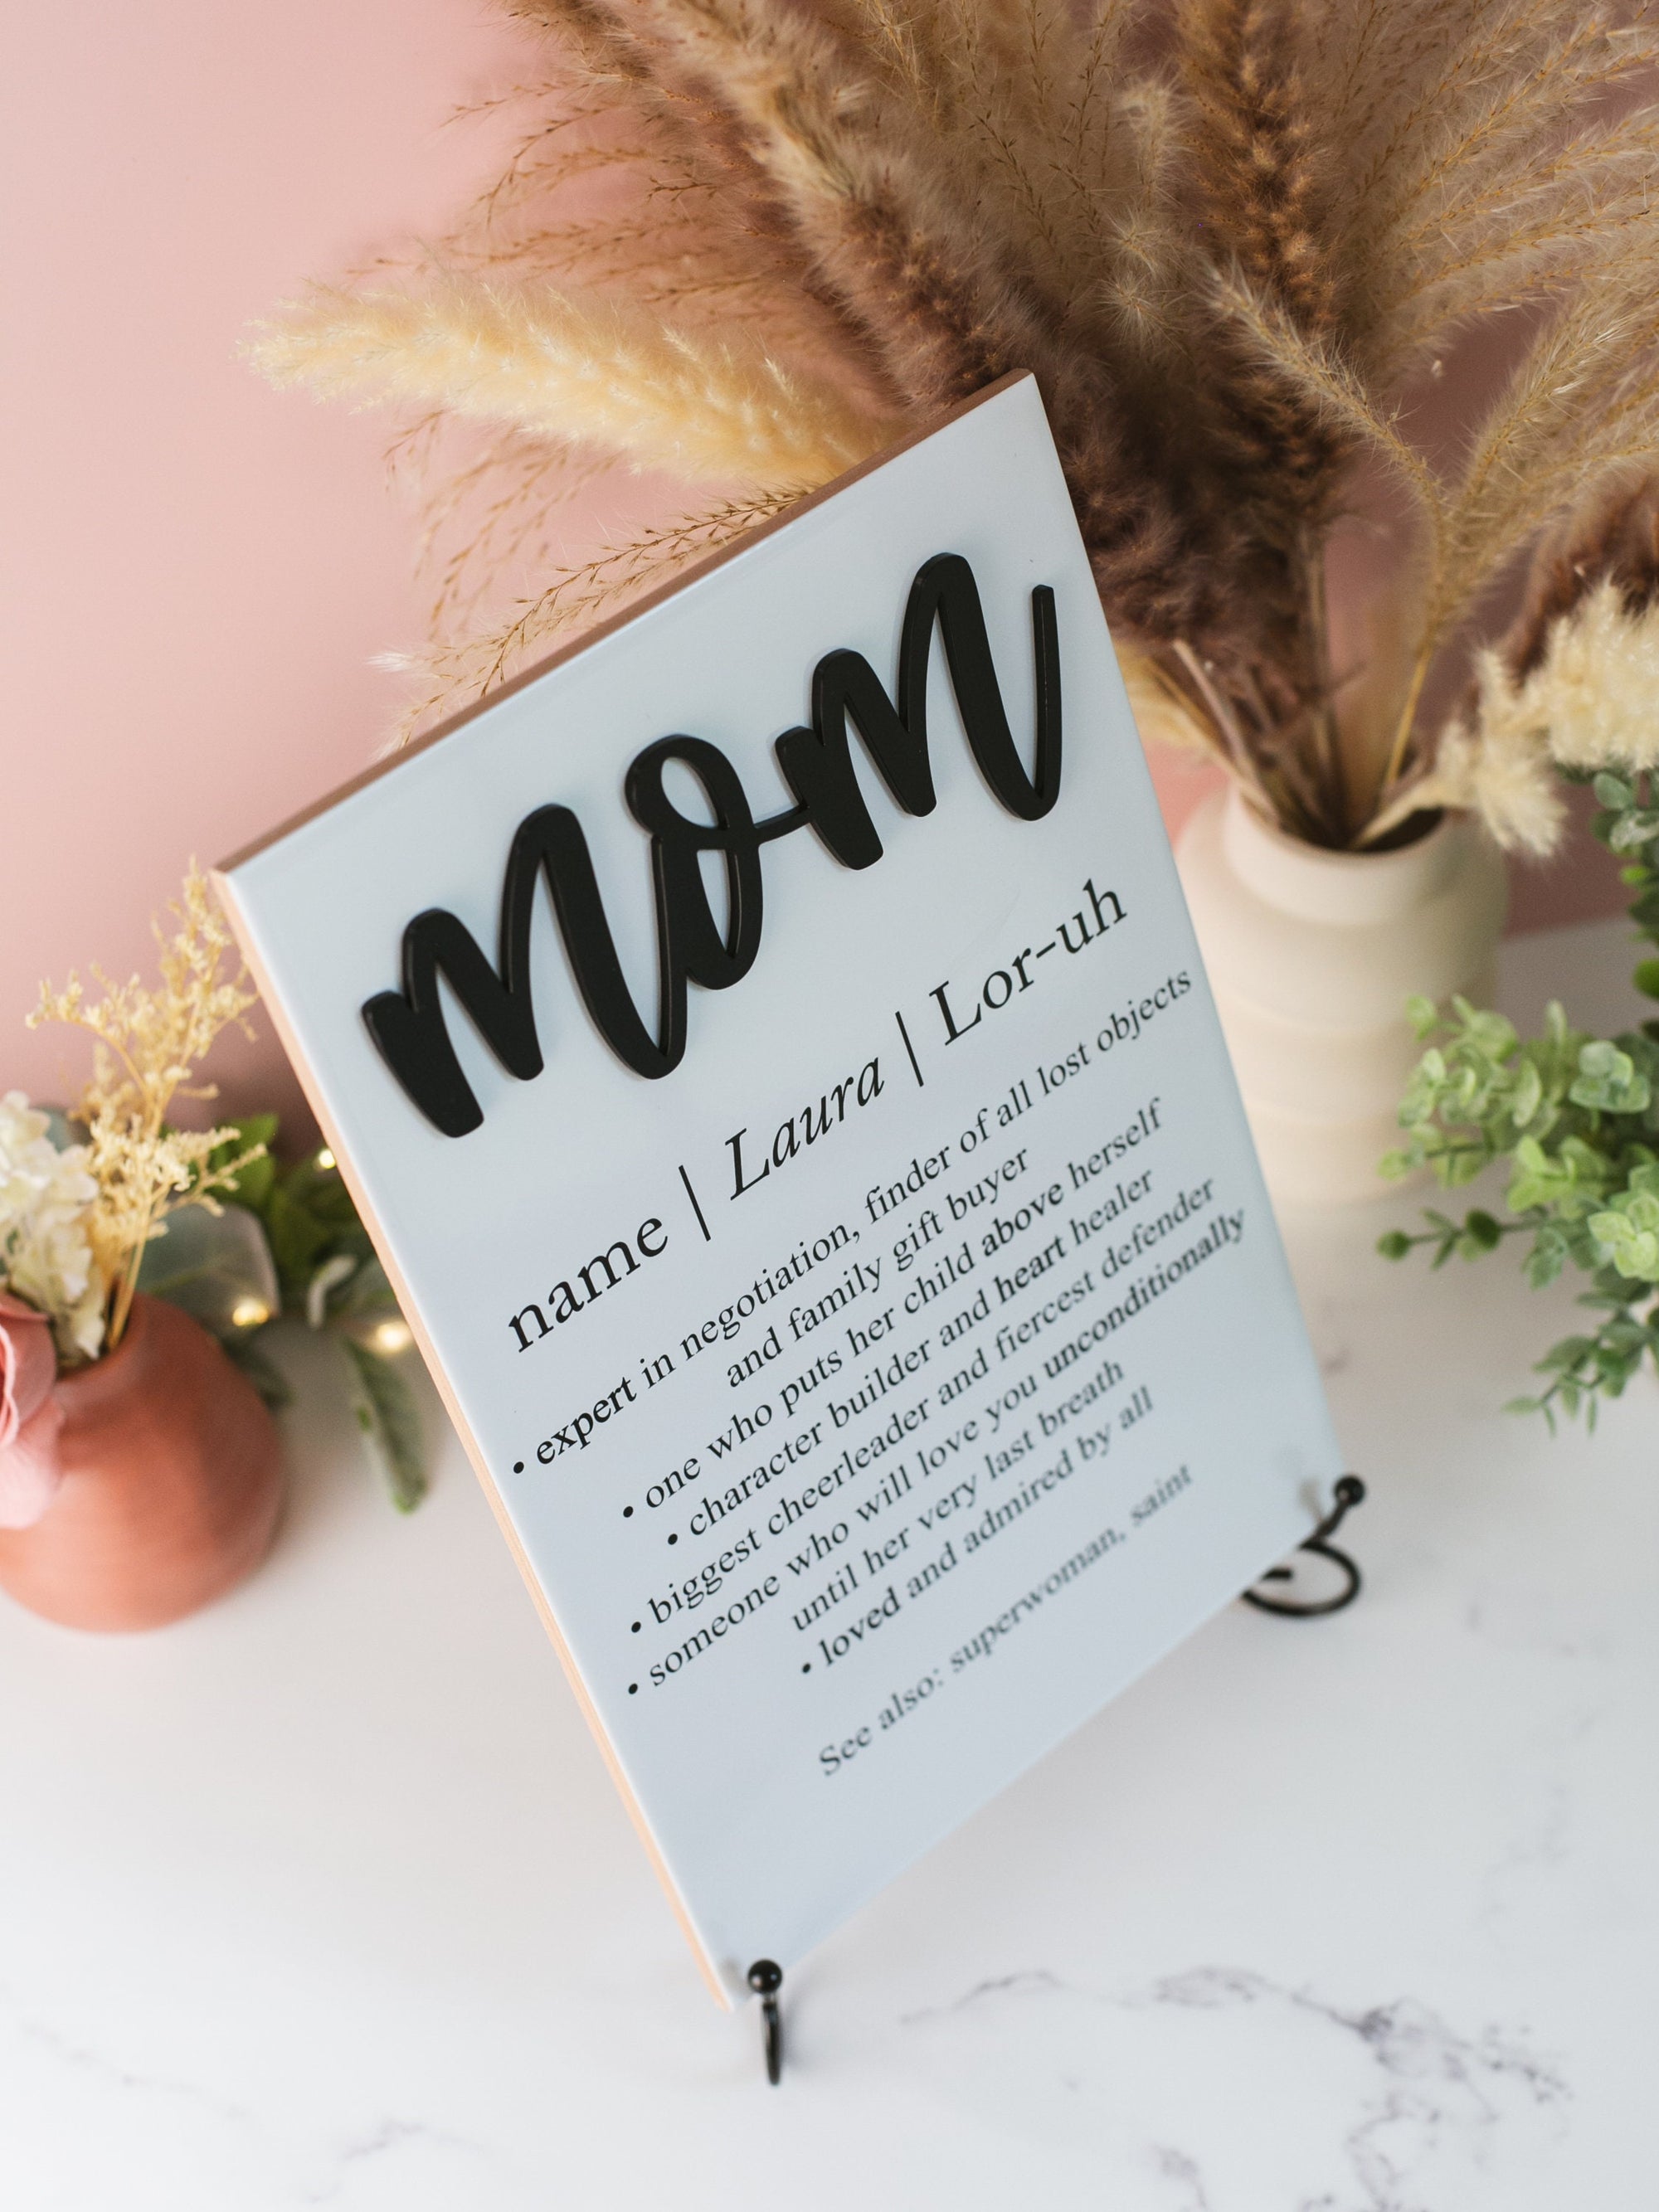 3D Mom Definition Ceramic Tile Sign Gift, Mothers Day Family Present Idea From Kids, Wall Decor, Nana, Mimi and Grandma Also Available